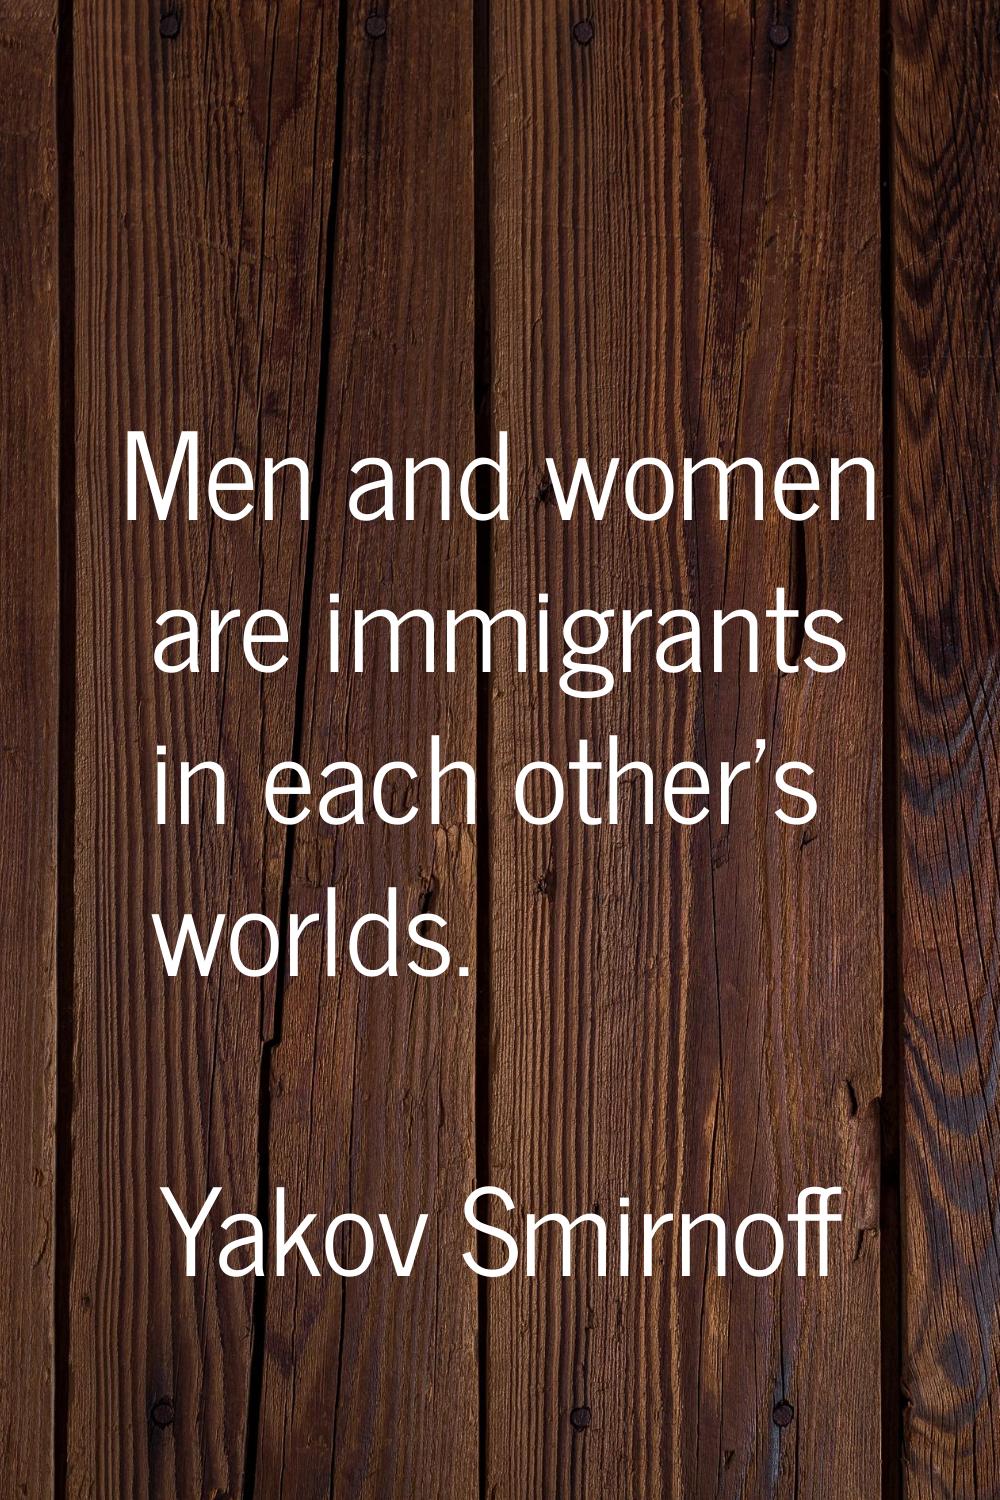 Men and women are immigrants in each other's worlds.